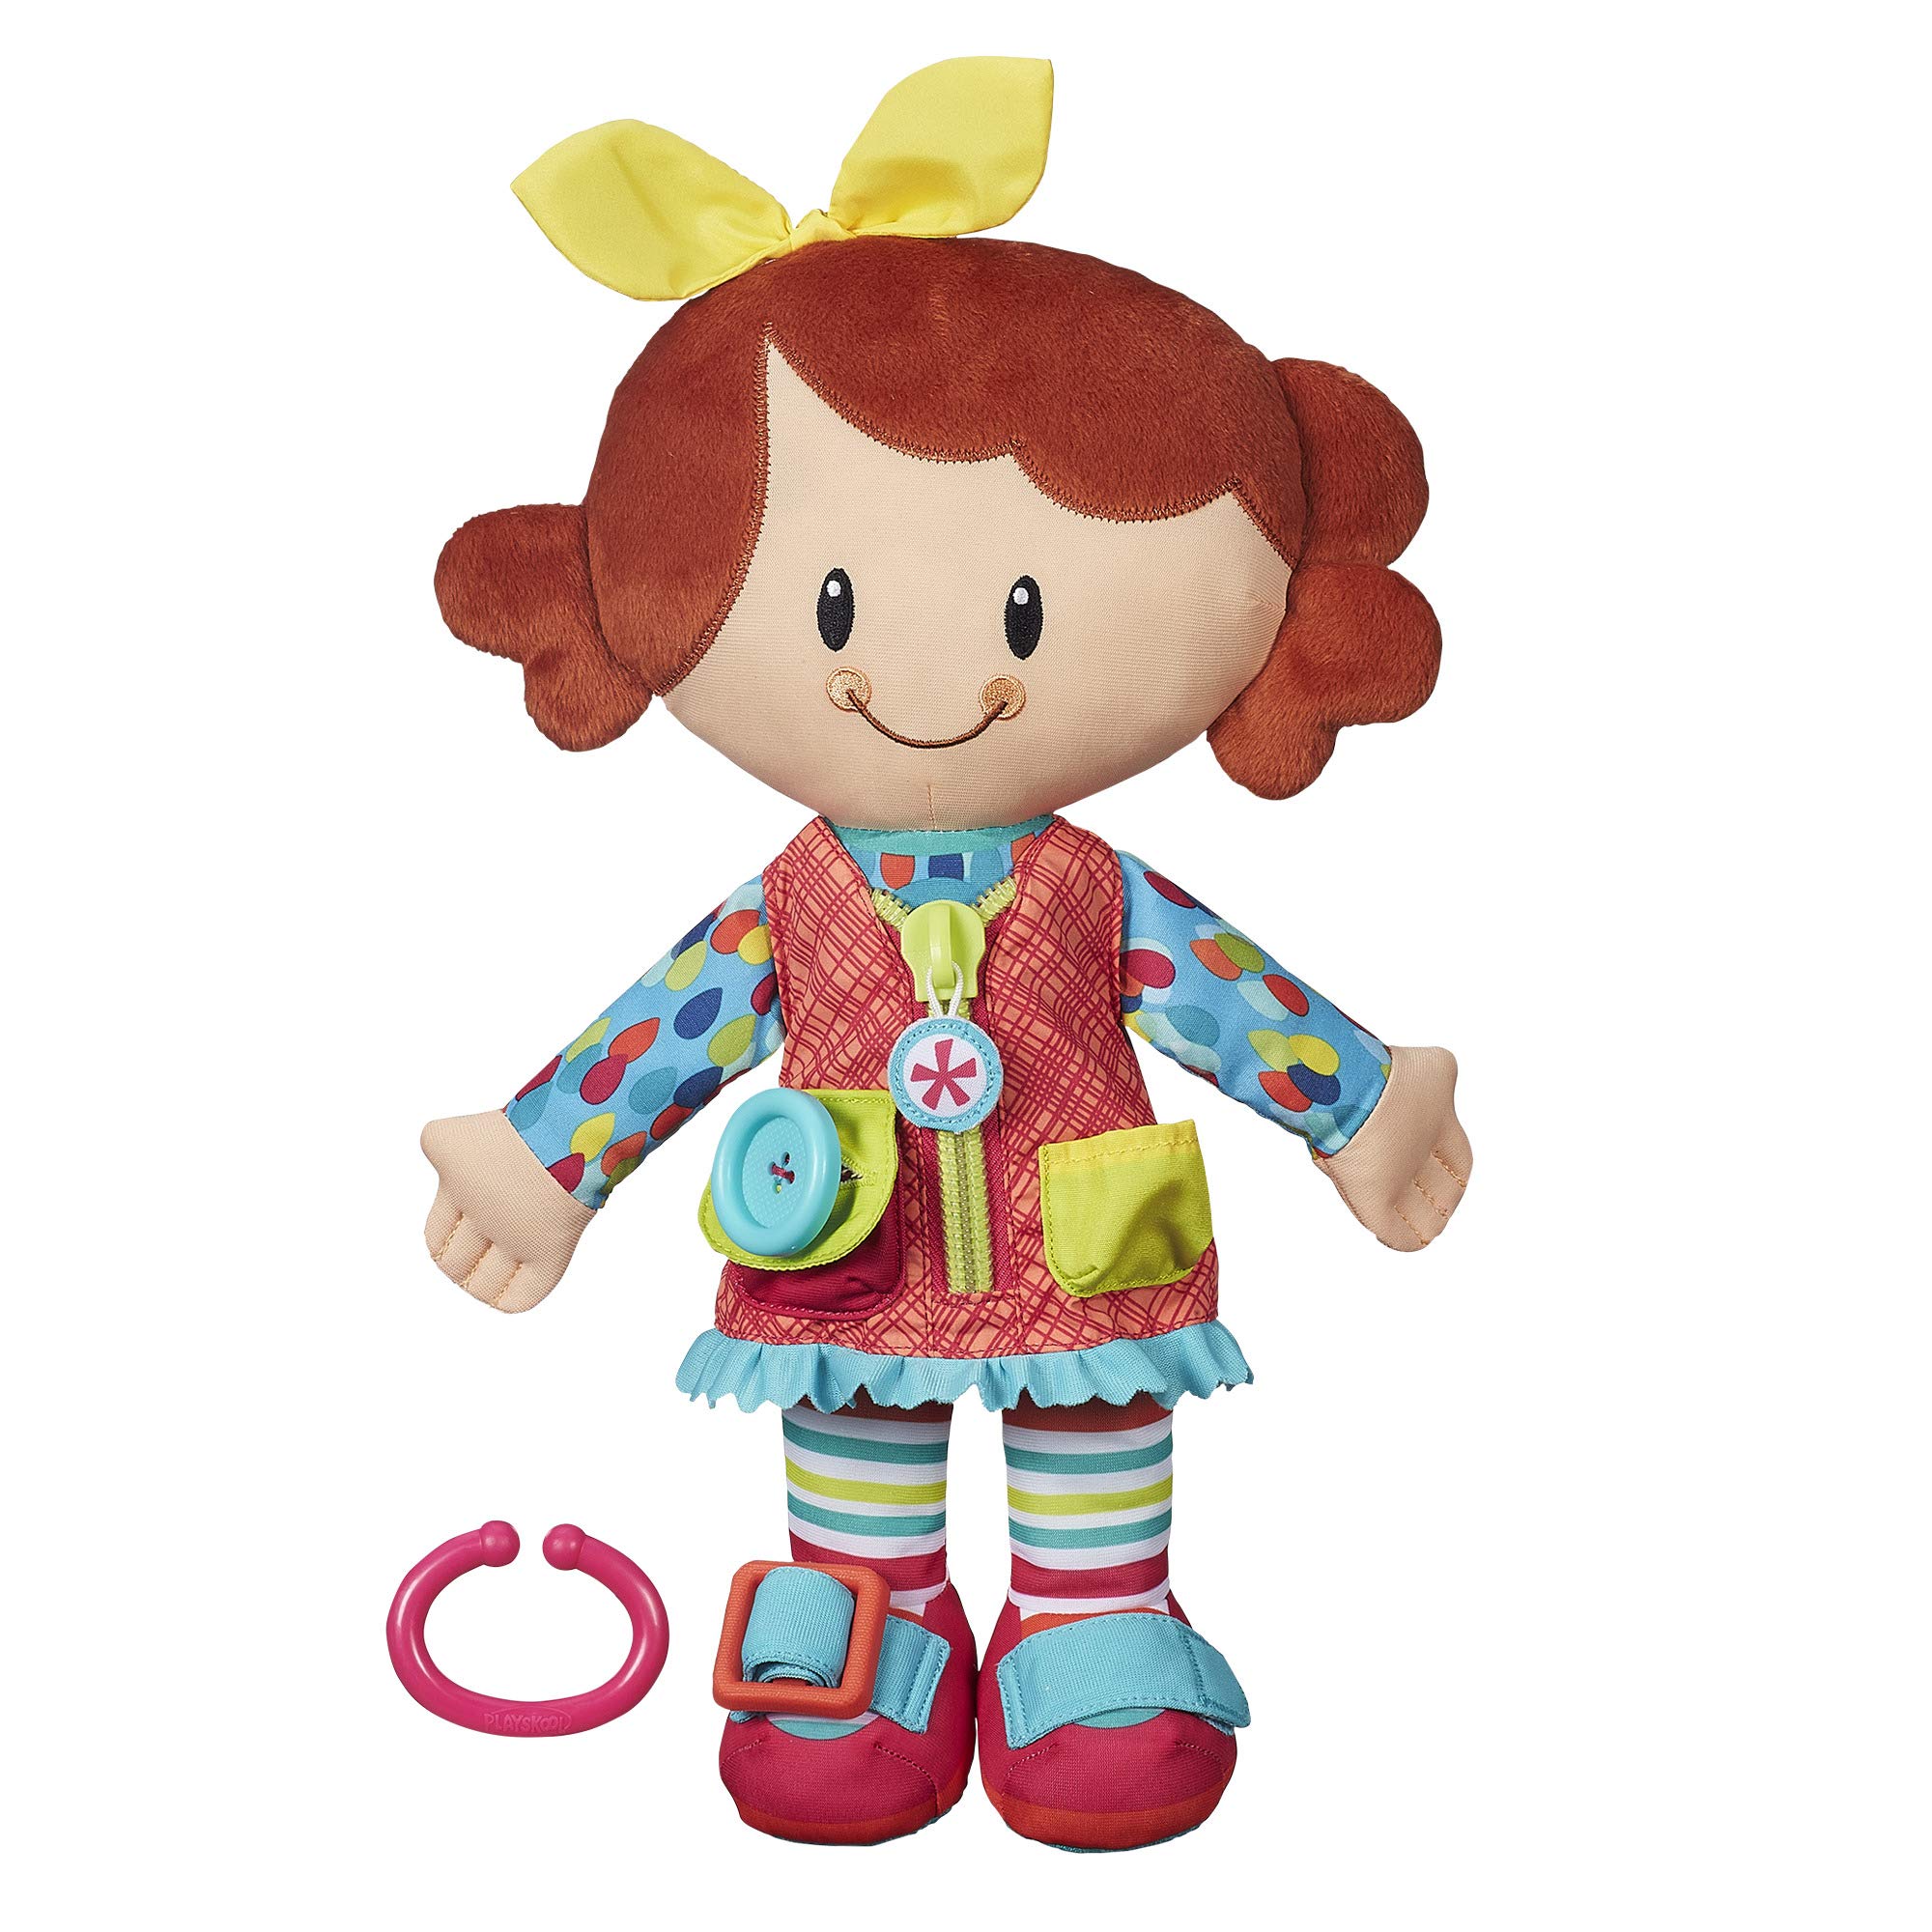 Playskool Dressy Kids girl Activity Plush Stuffed Doll Toy for Kids and Preschoolers 2 Years and Up ( Exclusive)